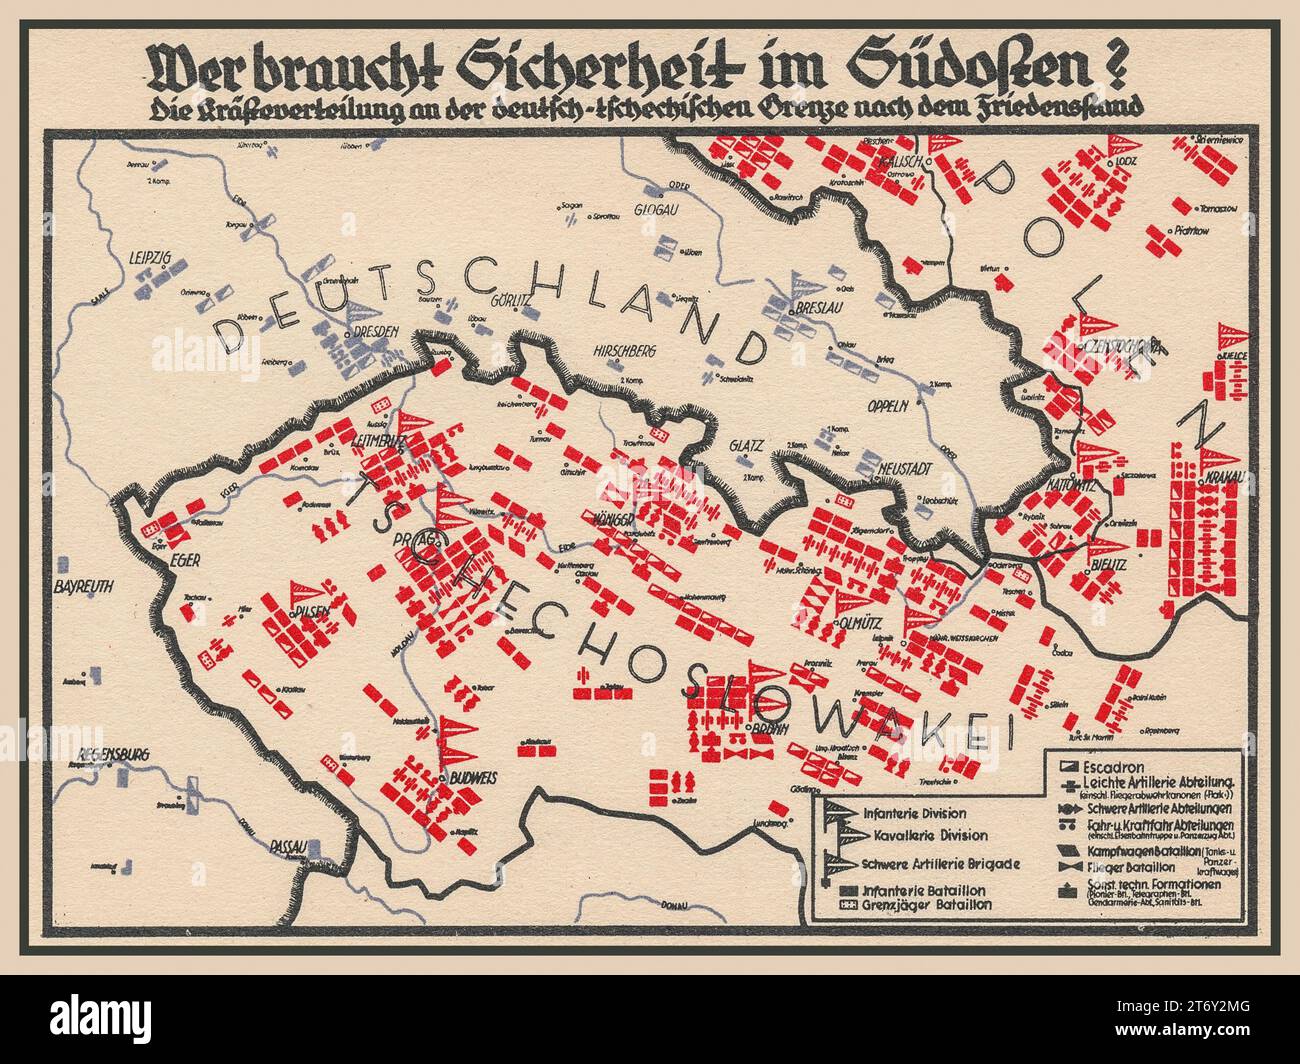 1930s Nazi Third Reich propaganda poster titled 'WHO NEEDS SECURITY IN THE SOUTHEAST, illustrating a map of Germany with borders of Czechoslovakia and Poland showing apparent significan build up of  men and military armaments. Stock Photo